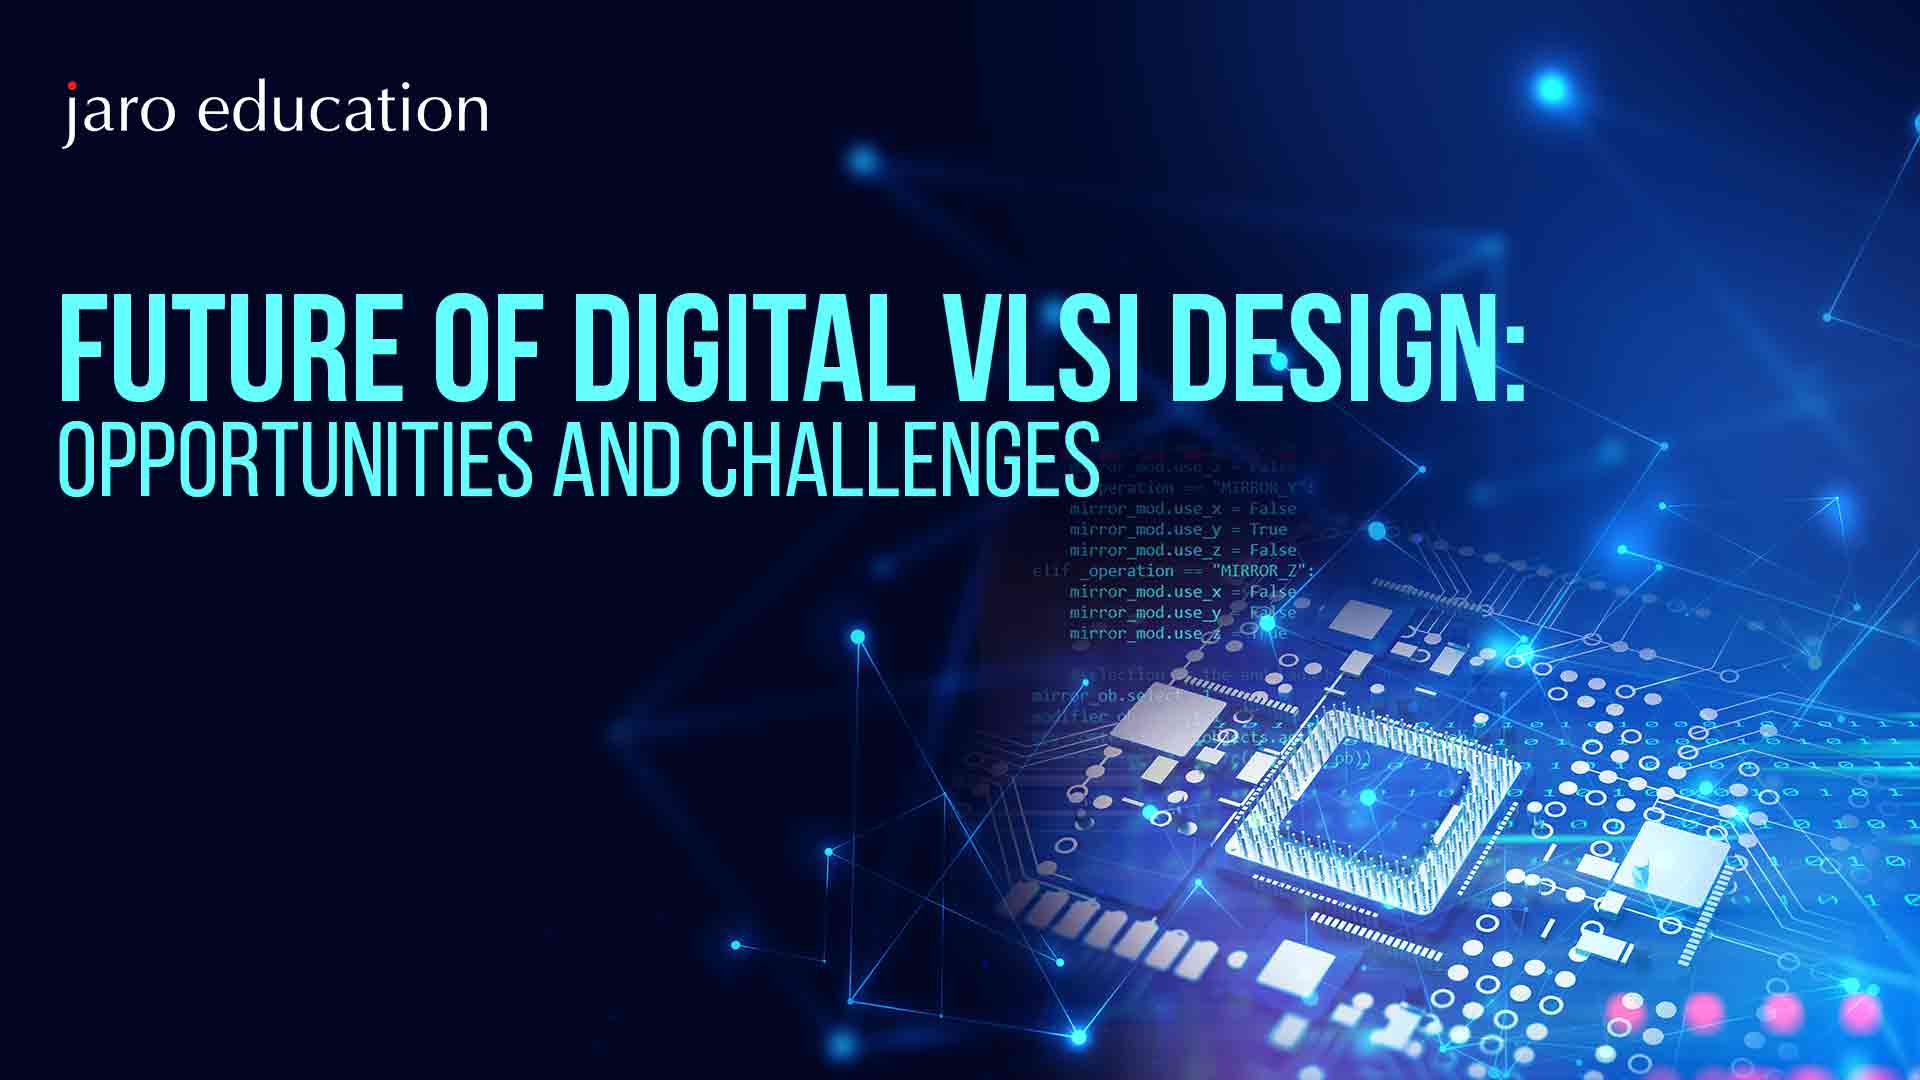 Future-of-Digital-VLSI-Design-Opportunities-and-Challenges (1)